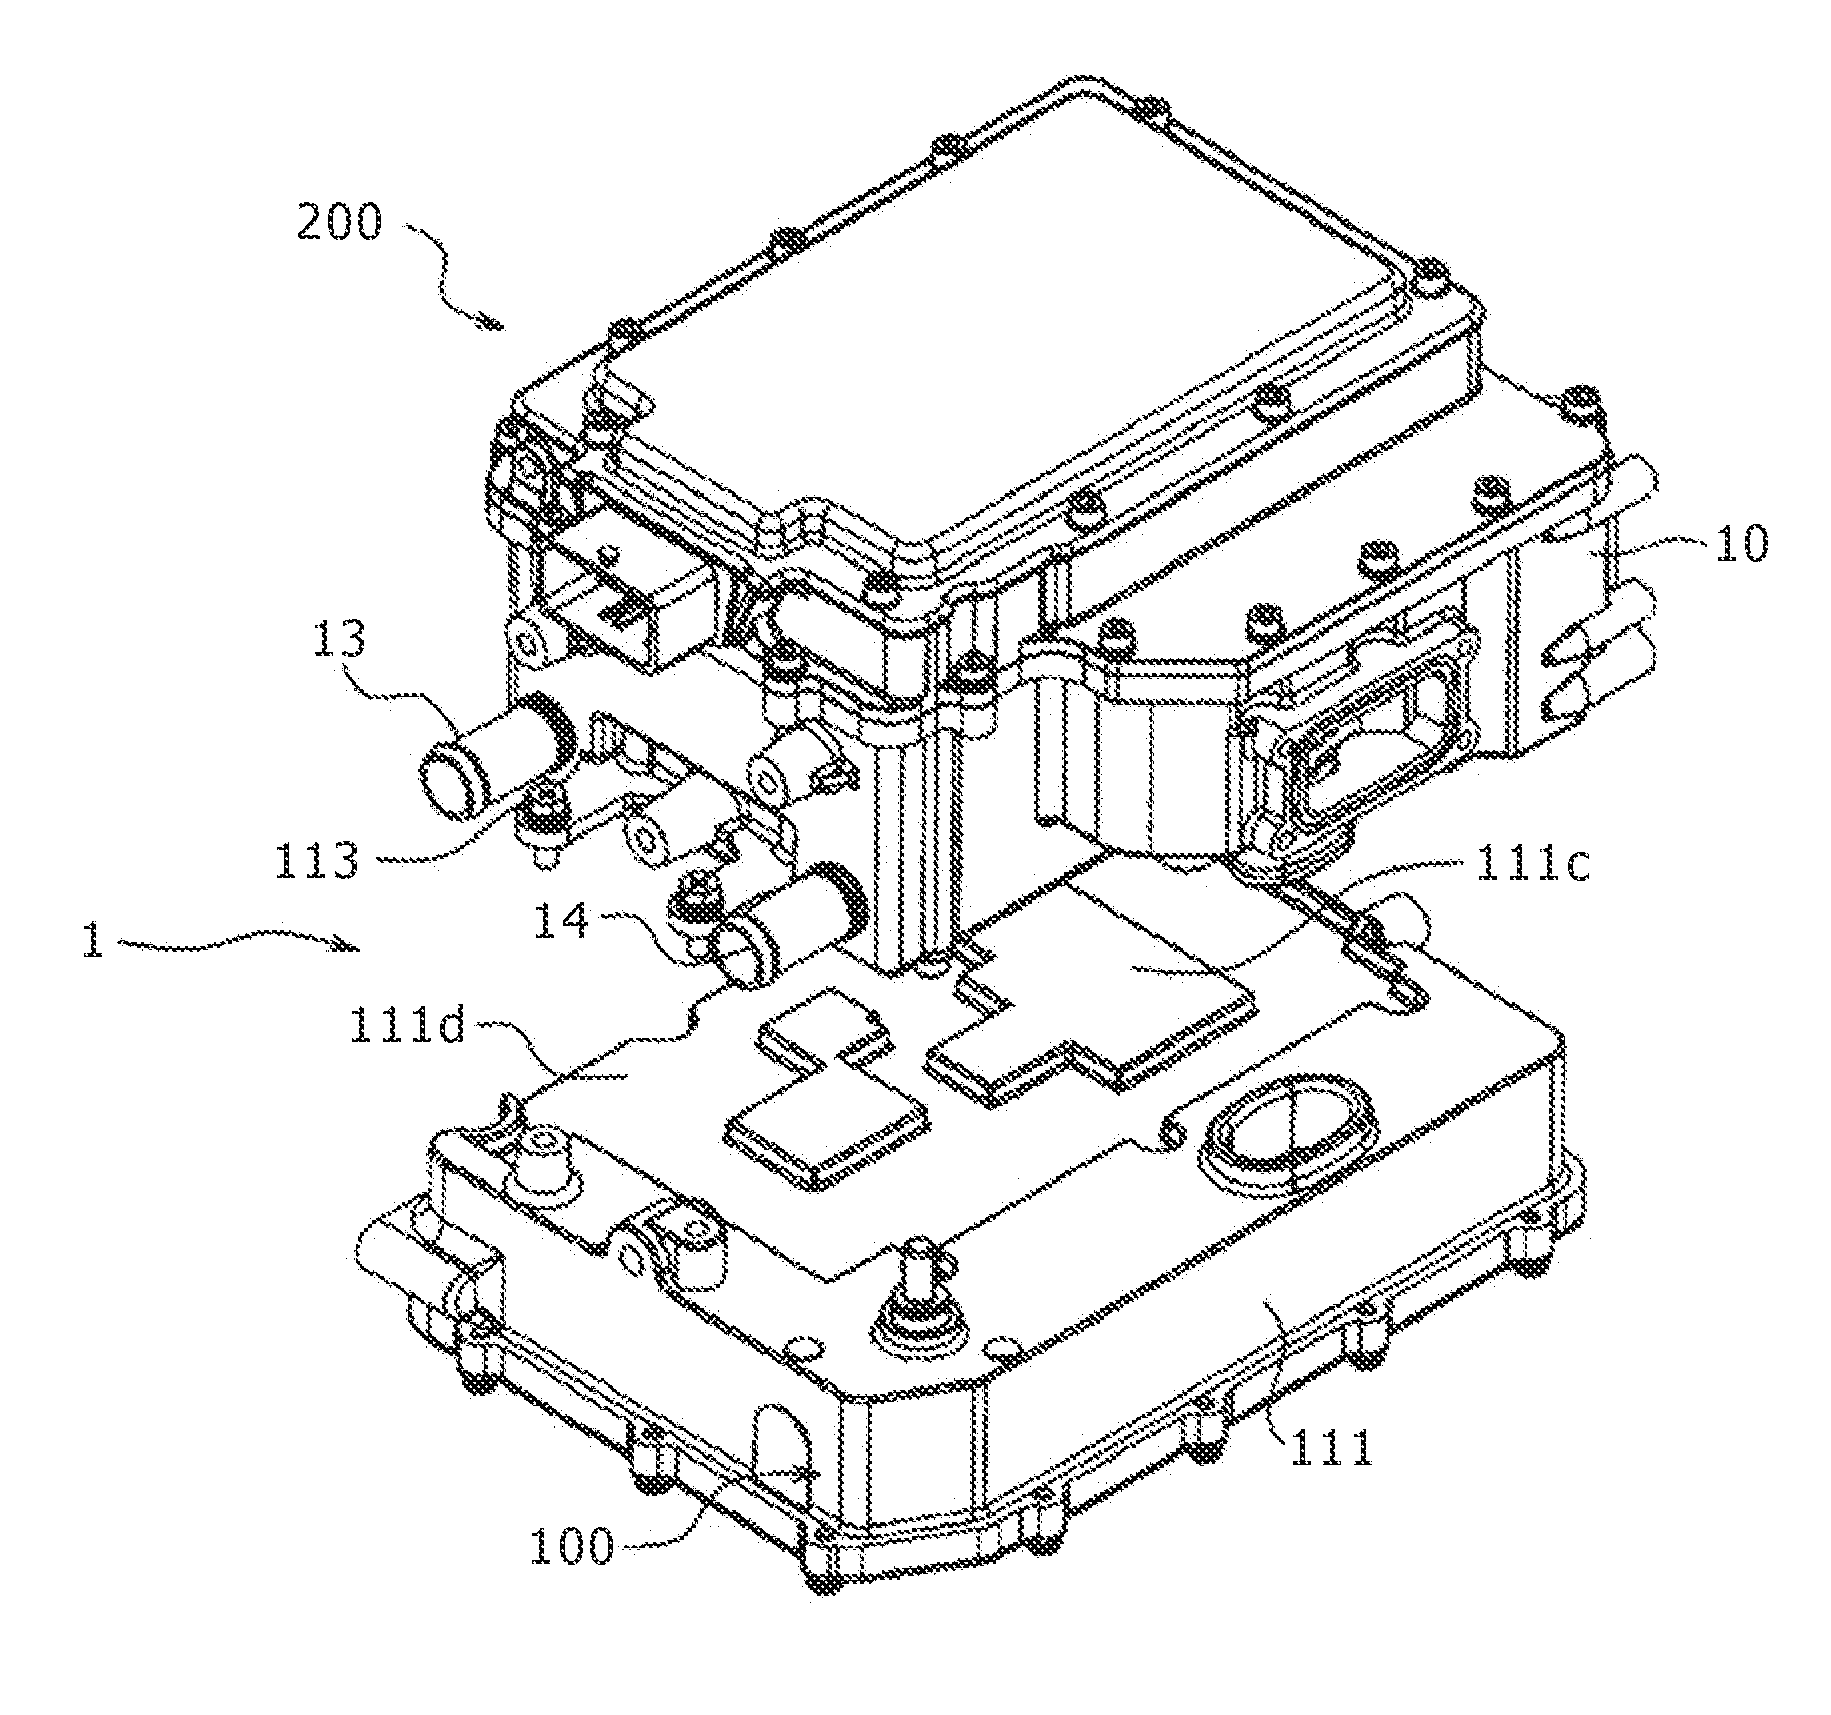 DC-DC Converter and Power Conversion Apparatus